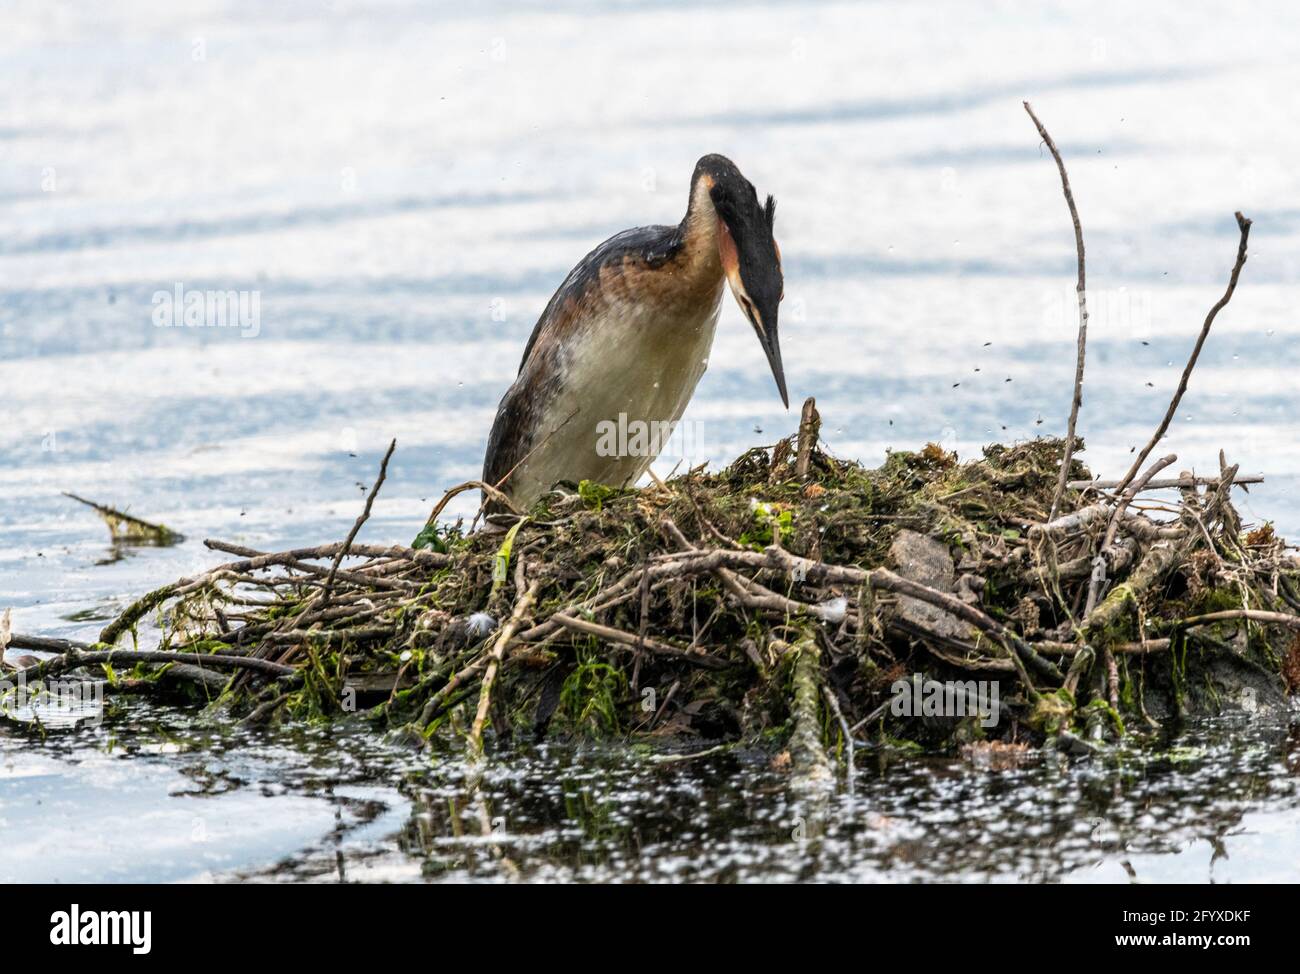 Nottingham 28 th May 2021::  Most photographed Crested grebes in England a breeding pair of Grebes have build the nest just feet away from the Richard Attenborough nature center , stunded onlookers watch from the center walk way.  : Clifford Norton Alamy Stock Photo